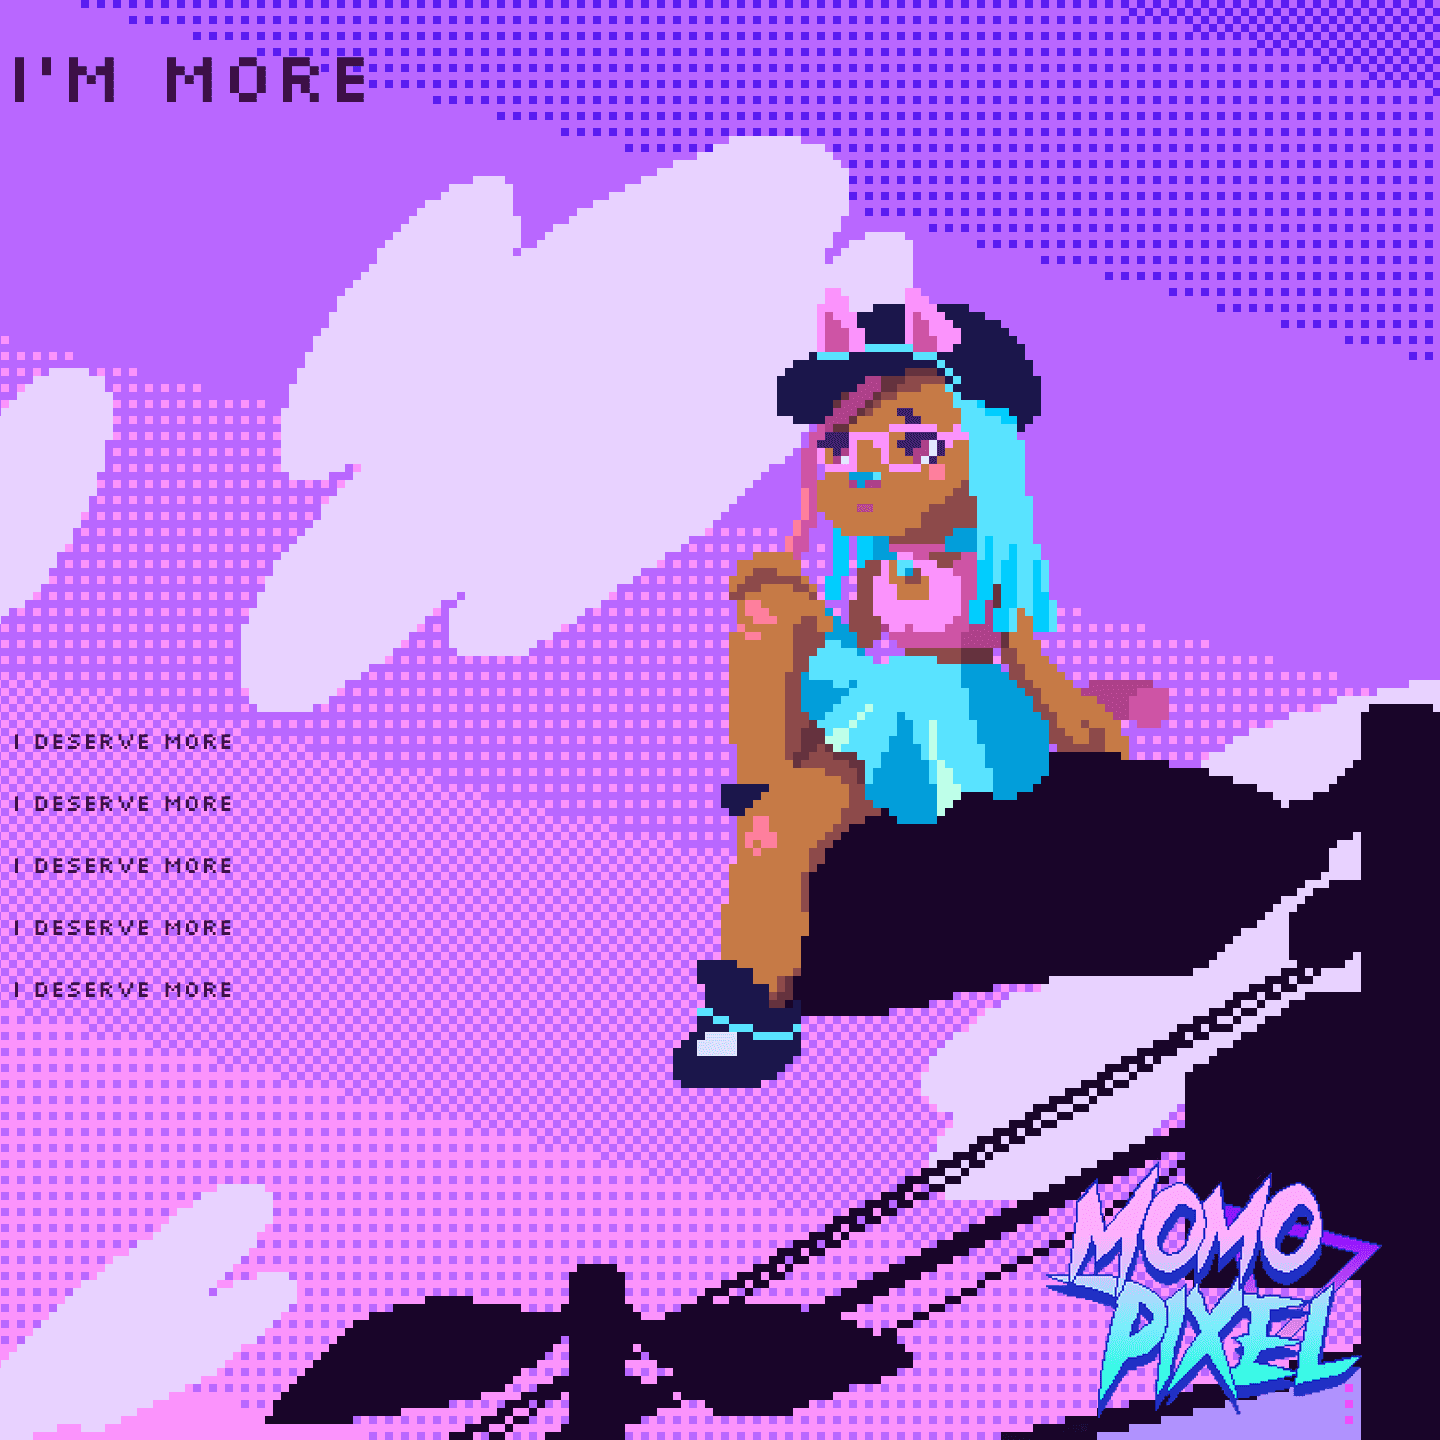 Cover art for I'm More by Momo Pixel